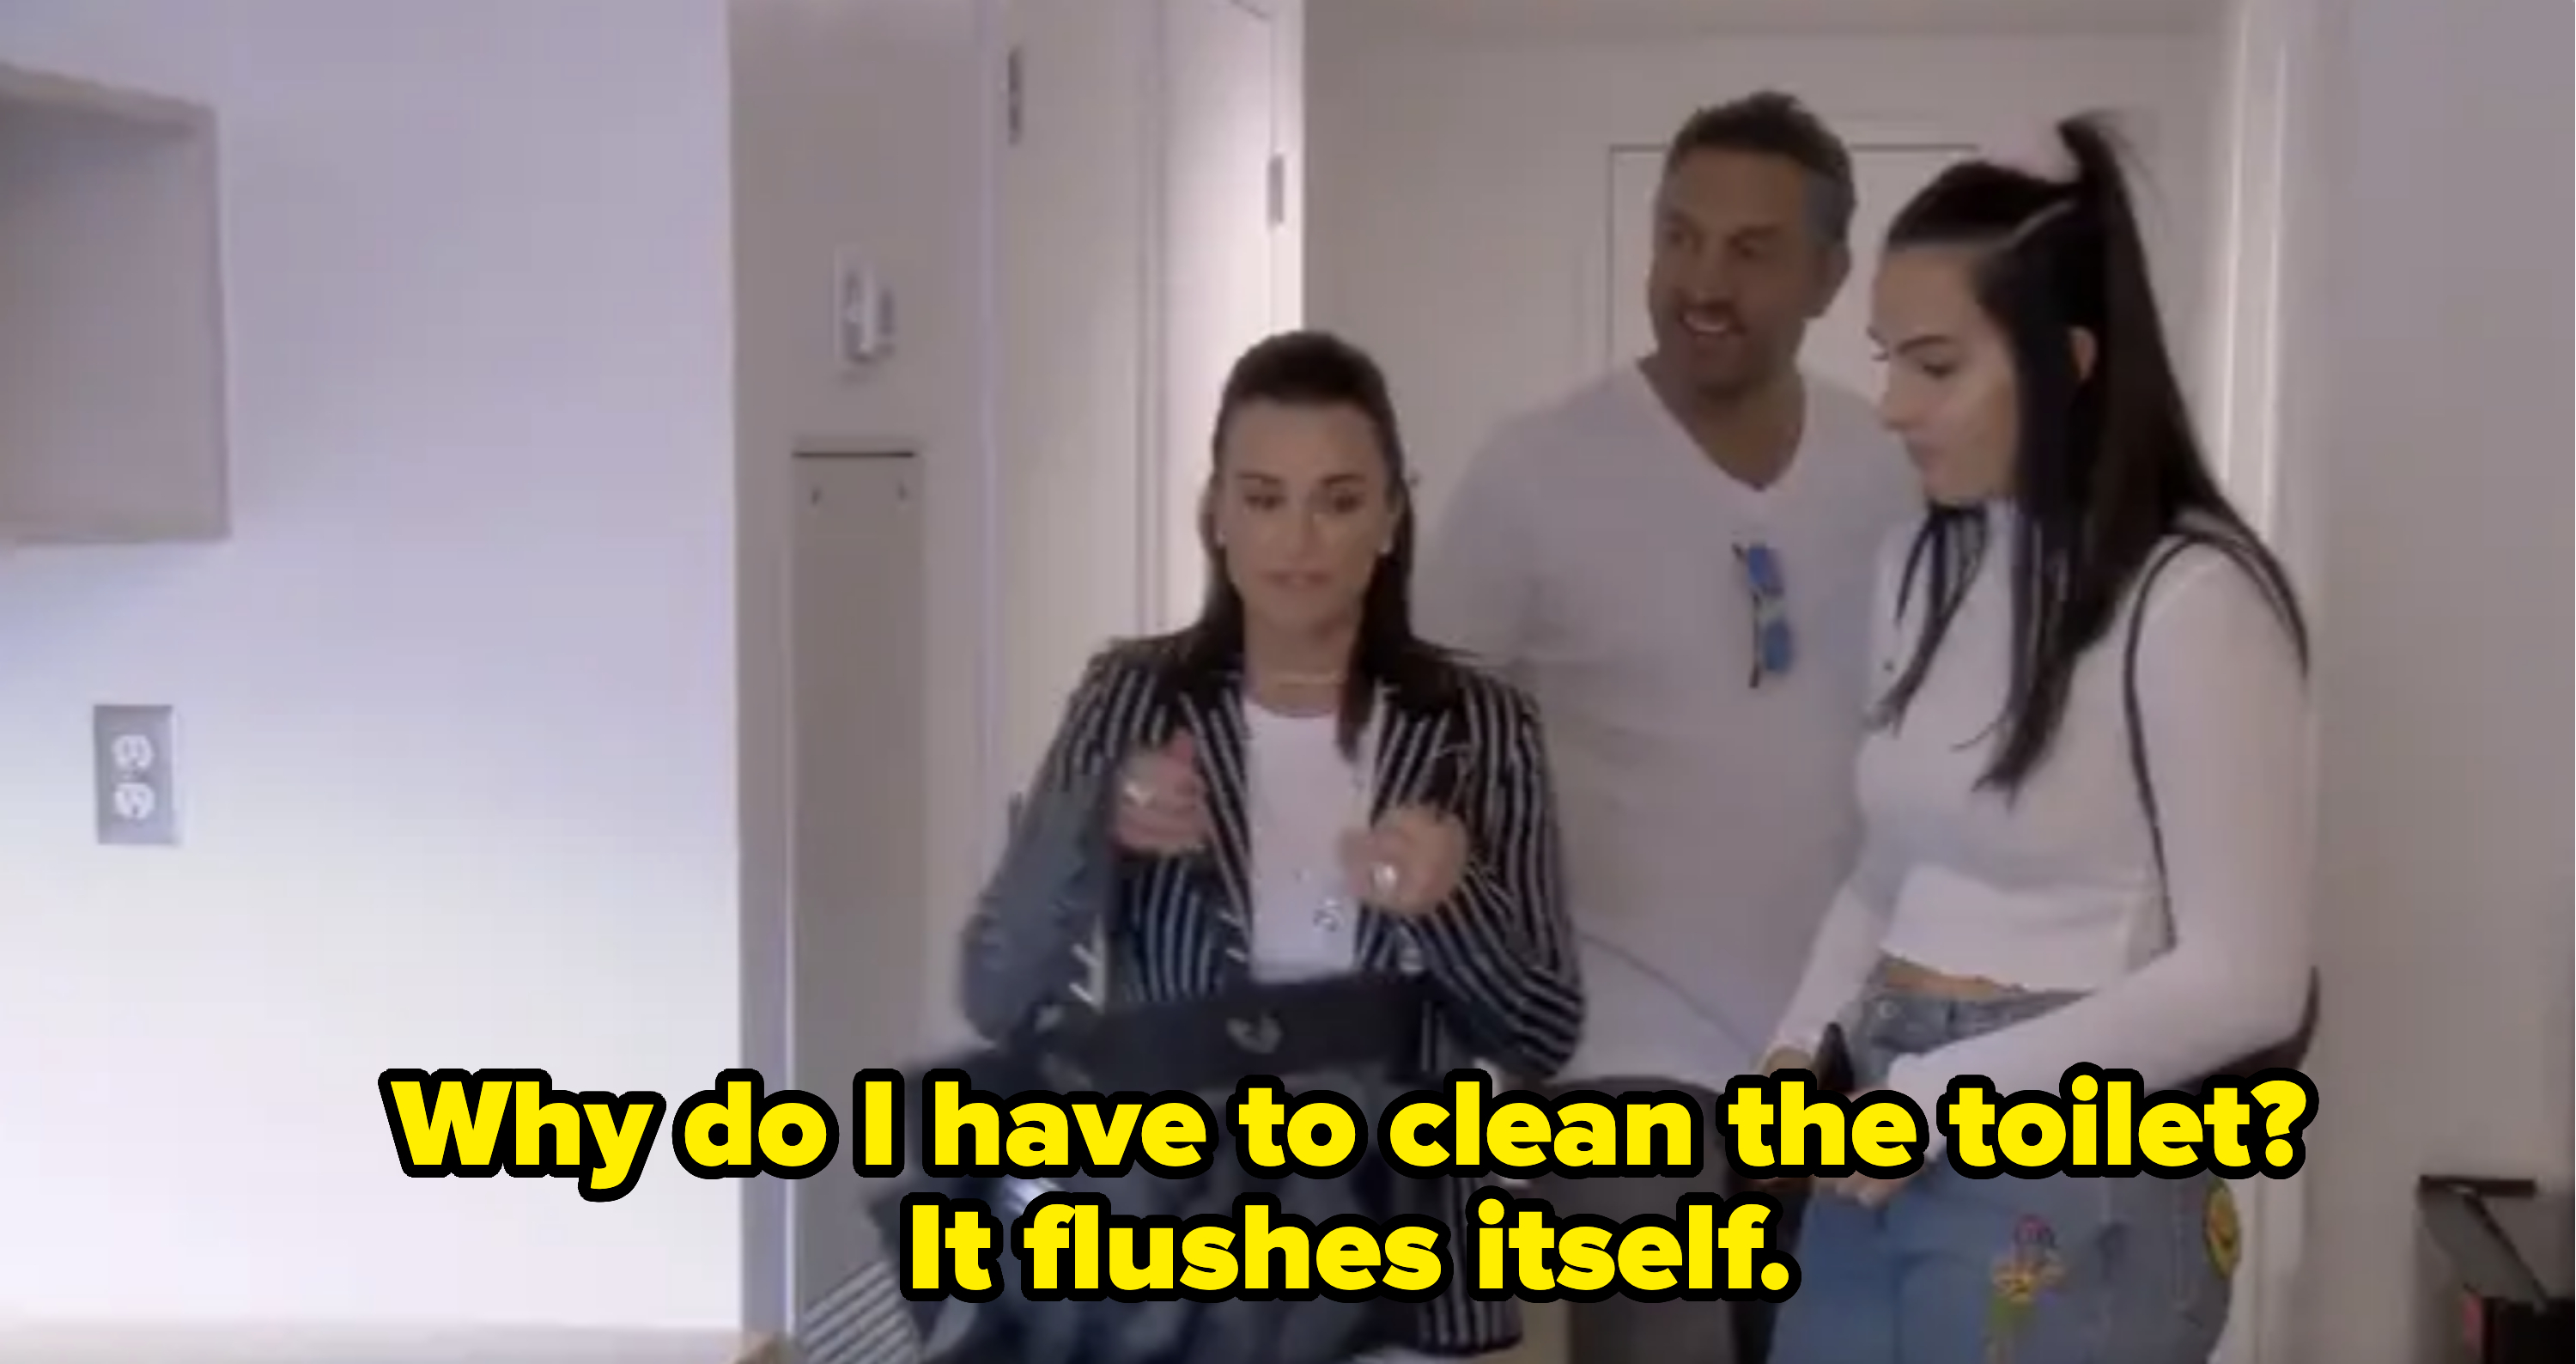 she walks in with her parents saying, why do i have to clean the toilet, it flushes itself